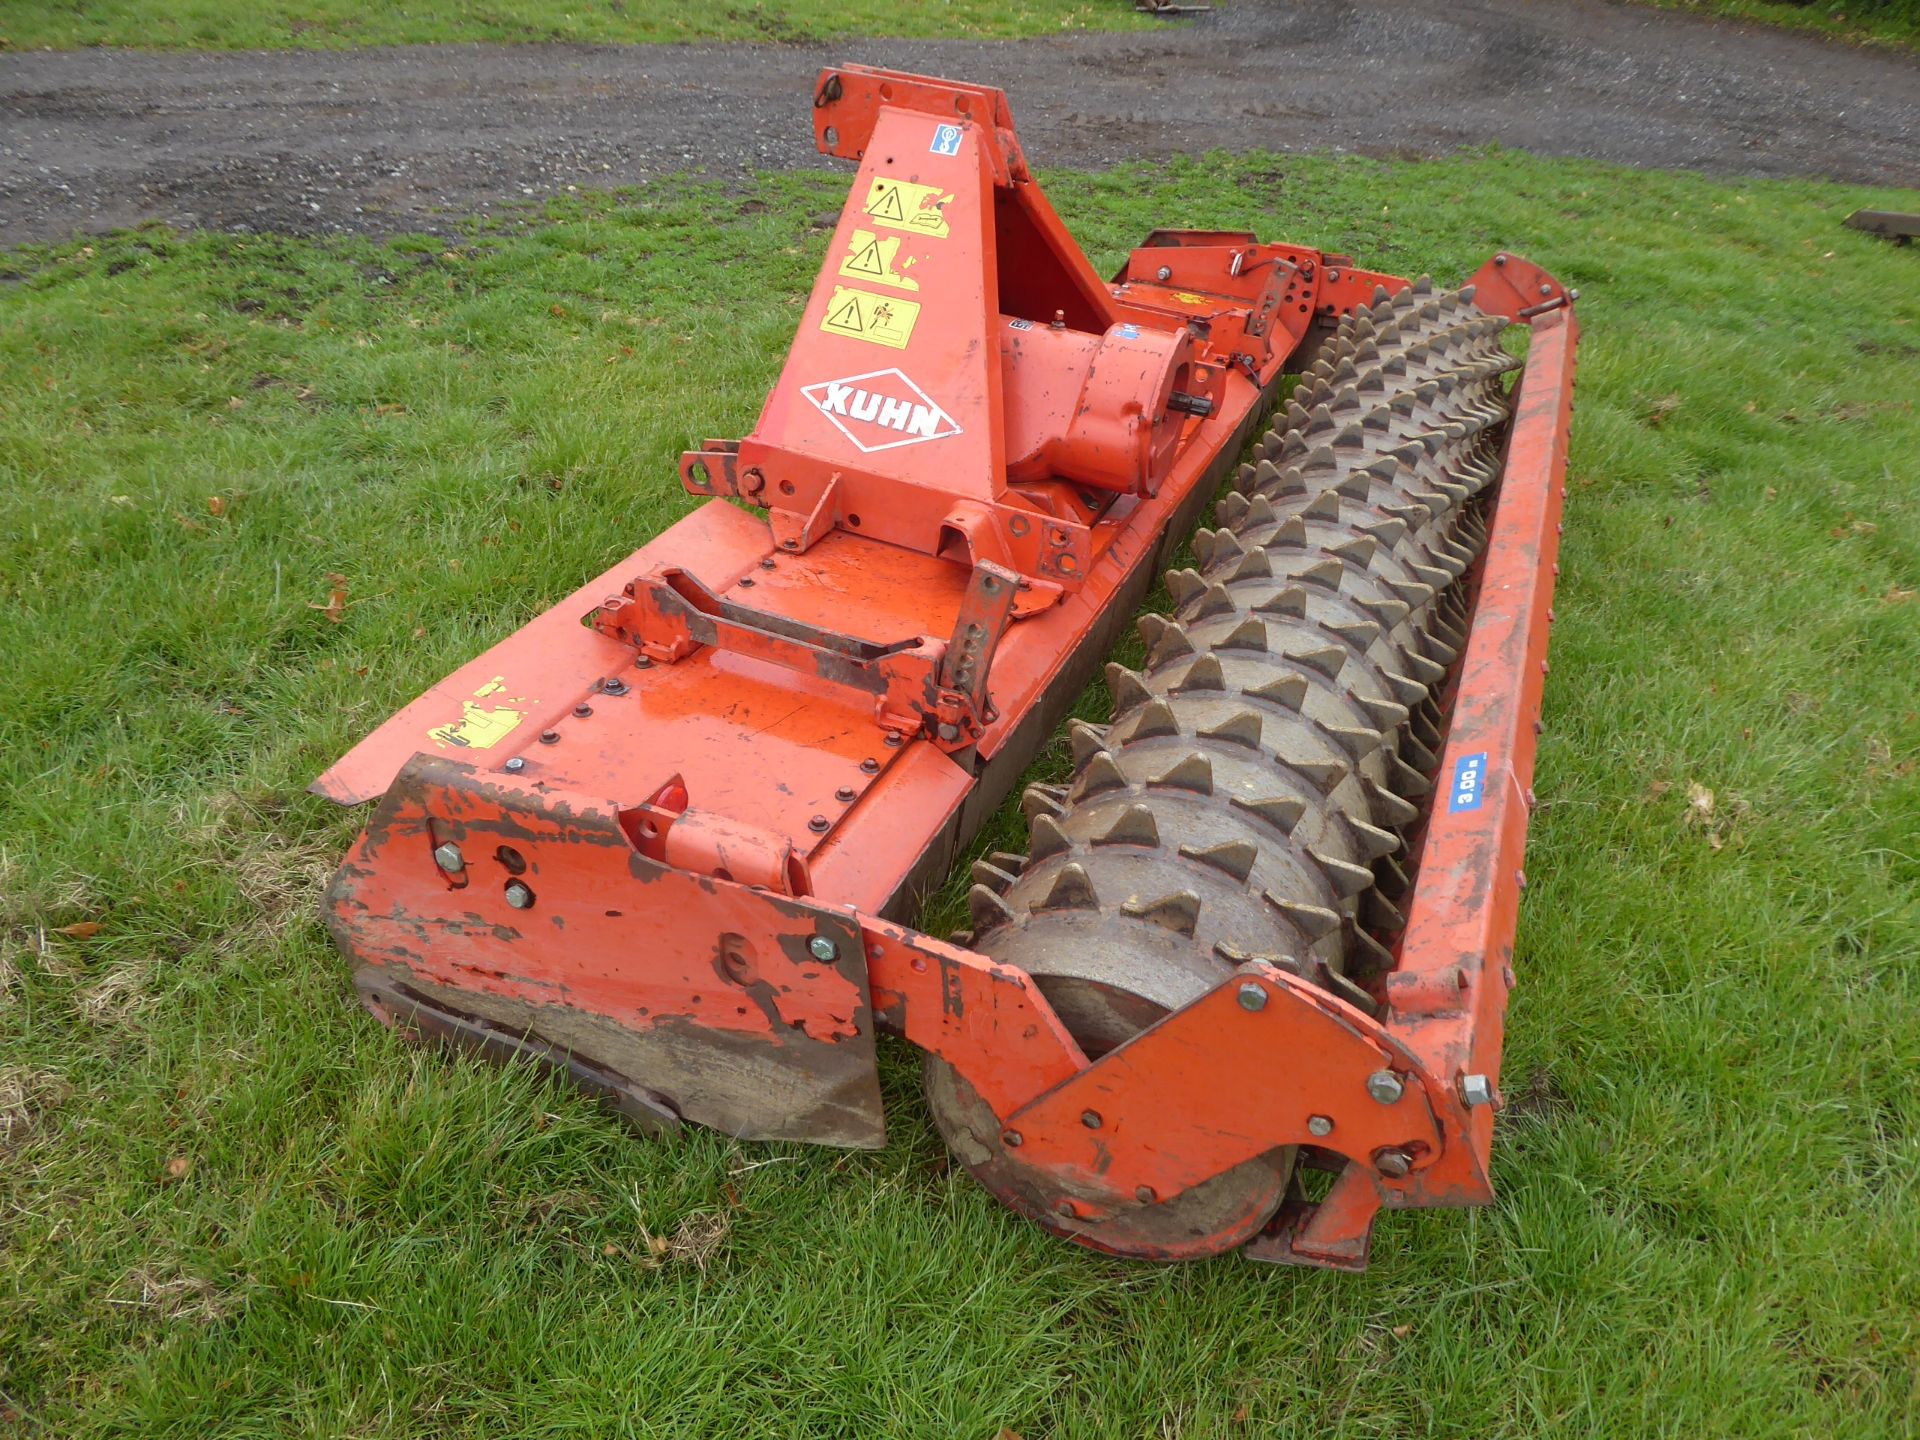 2002 Kuhn 3 mtr power harrow, quick fit tines,good packer - Image 3 of 4